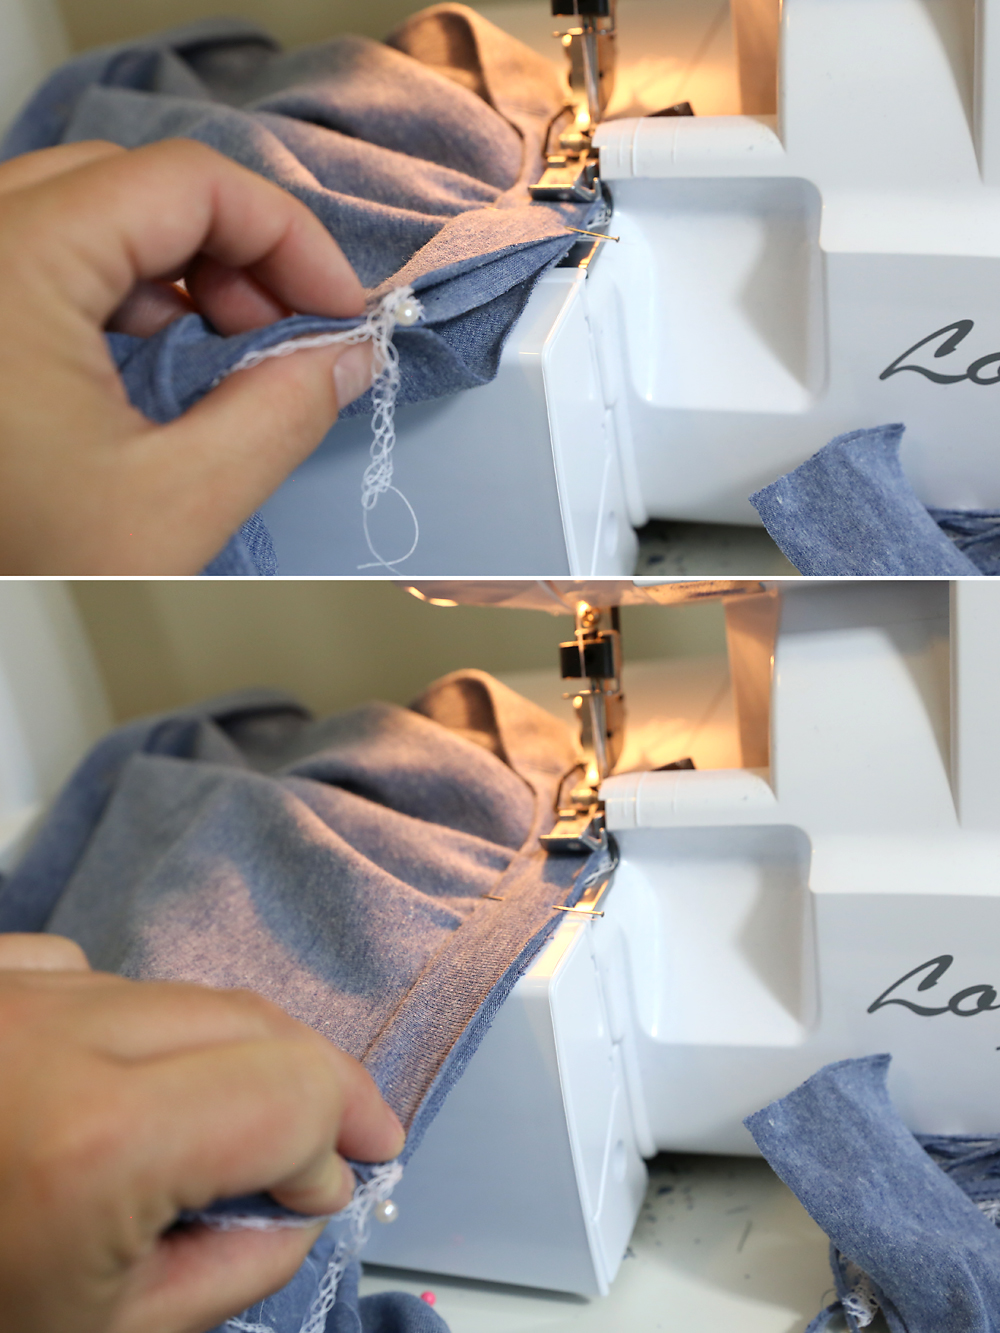 Sewing on the neckbinding on a sewing machine